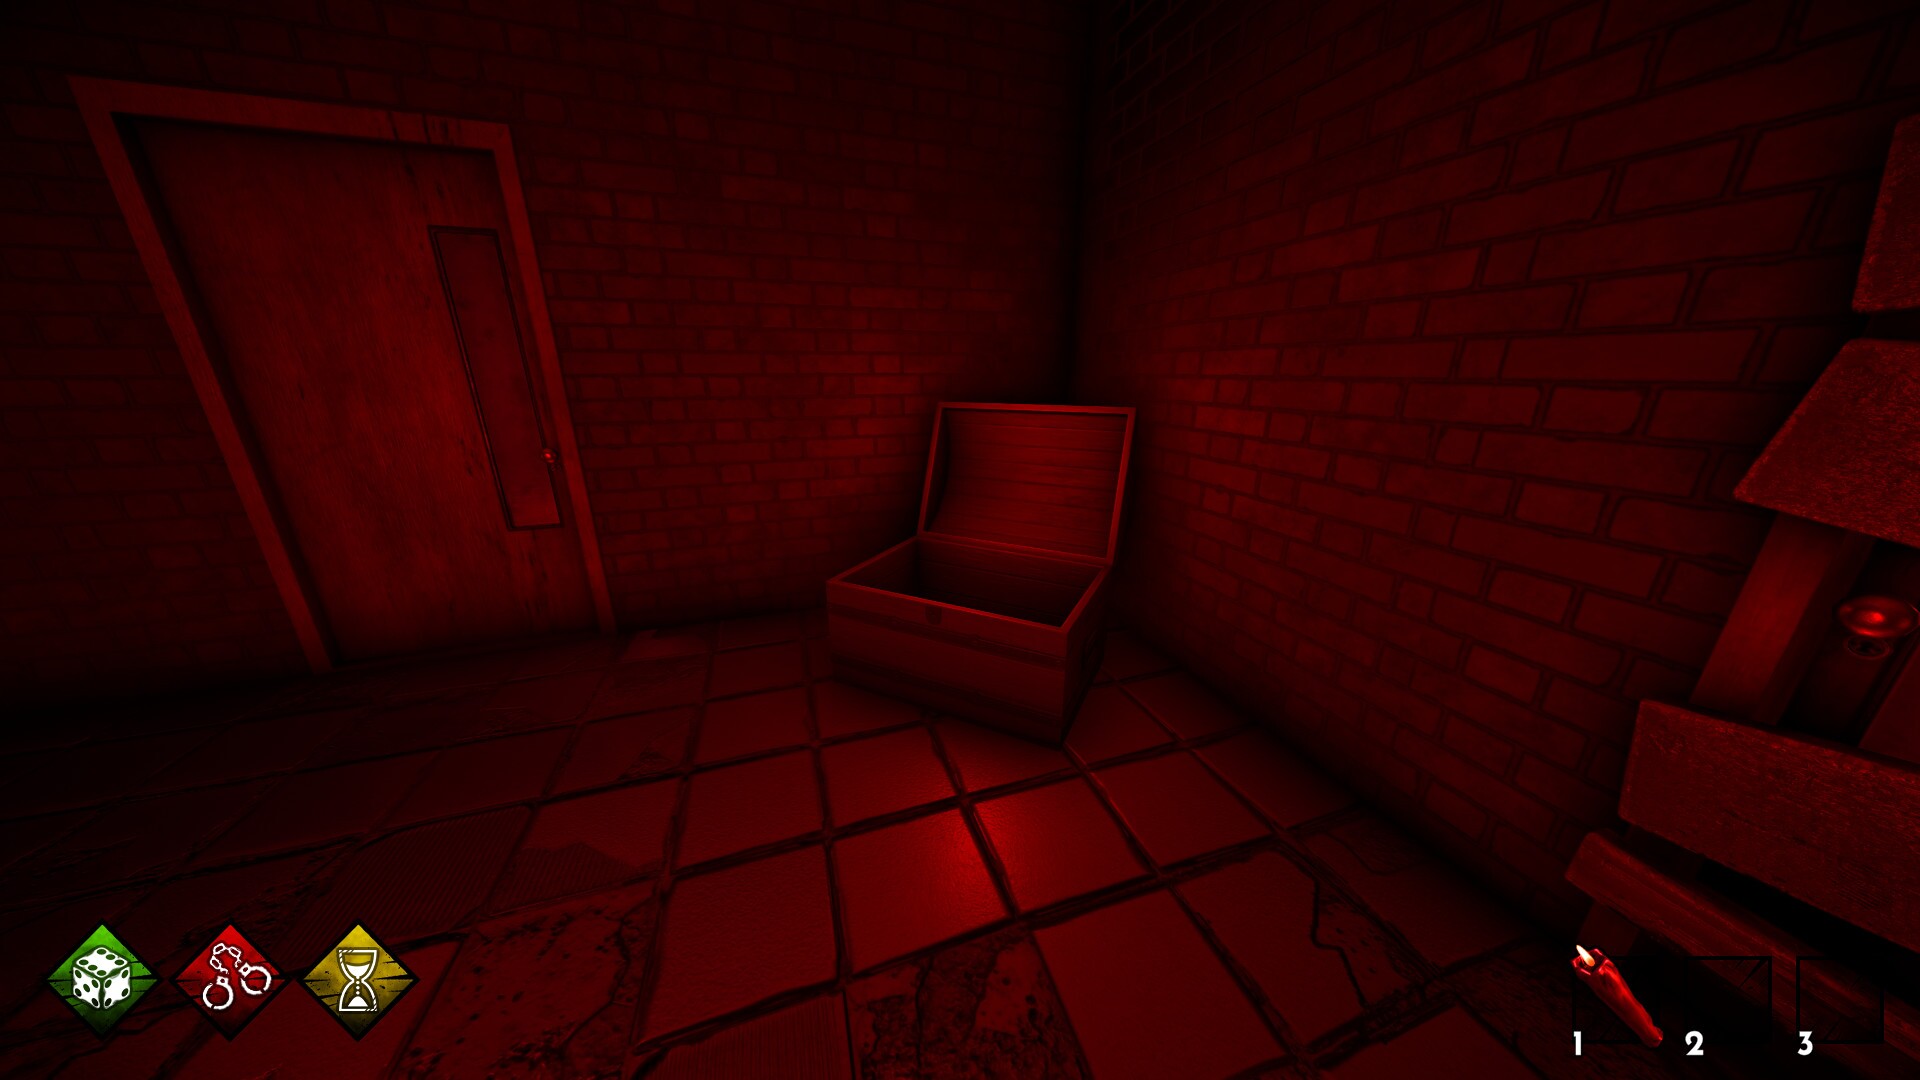 Игра красная голова. The Red Exile. The Red Exile - Survival Horror 360₽. Red Exile nipobox Perks. The Red Exile banner.